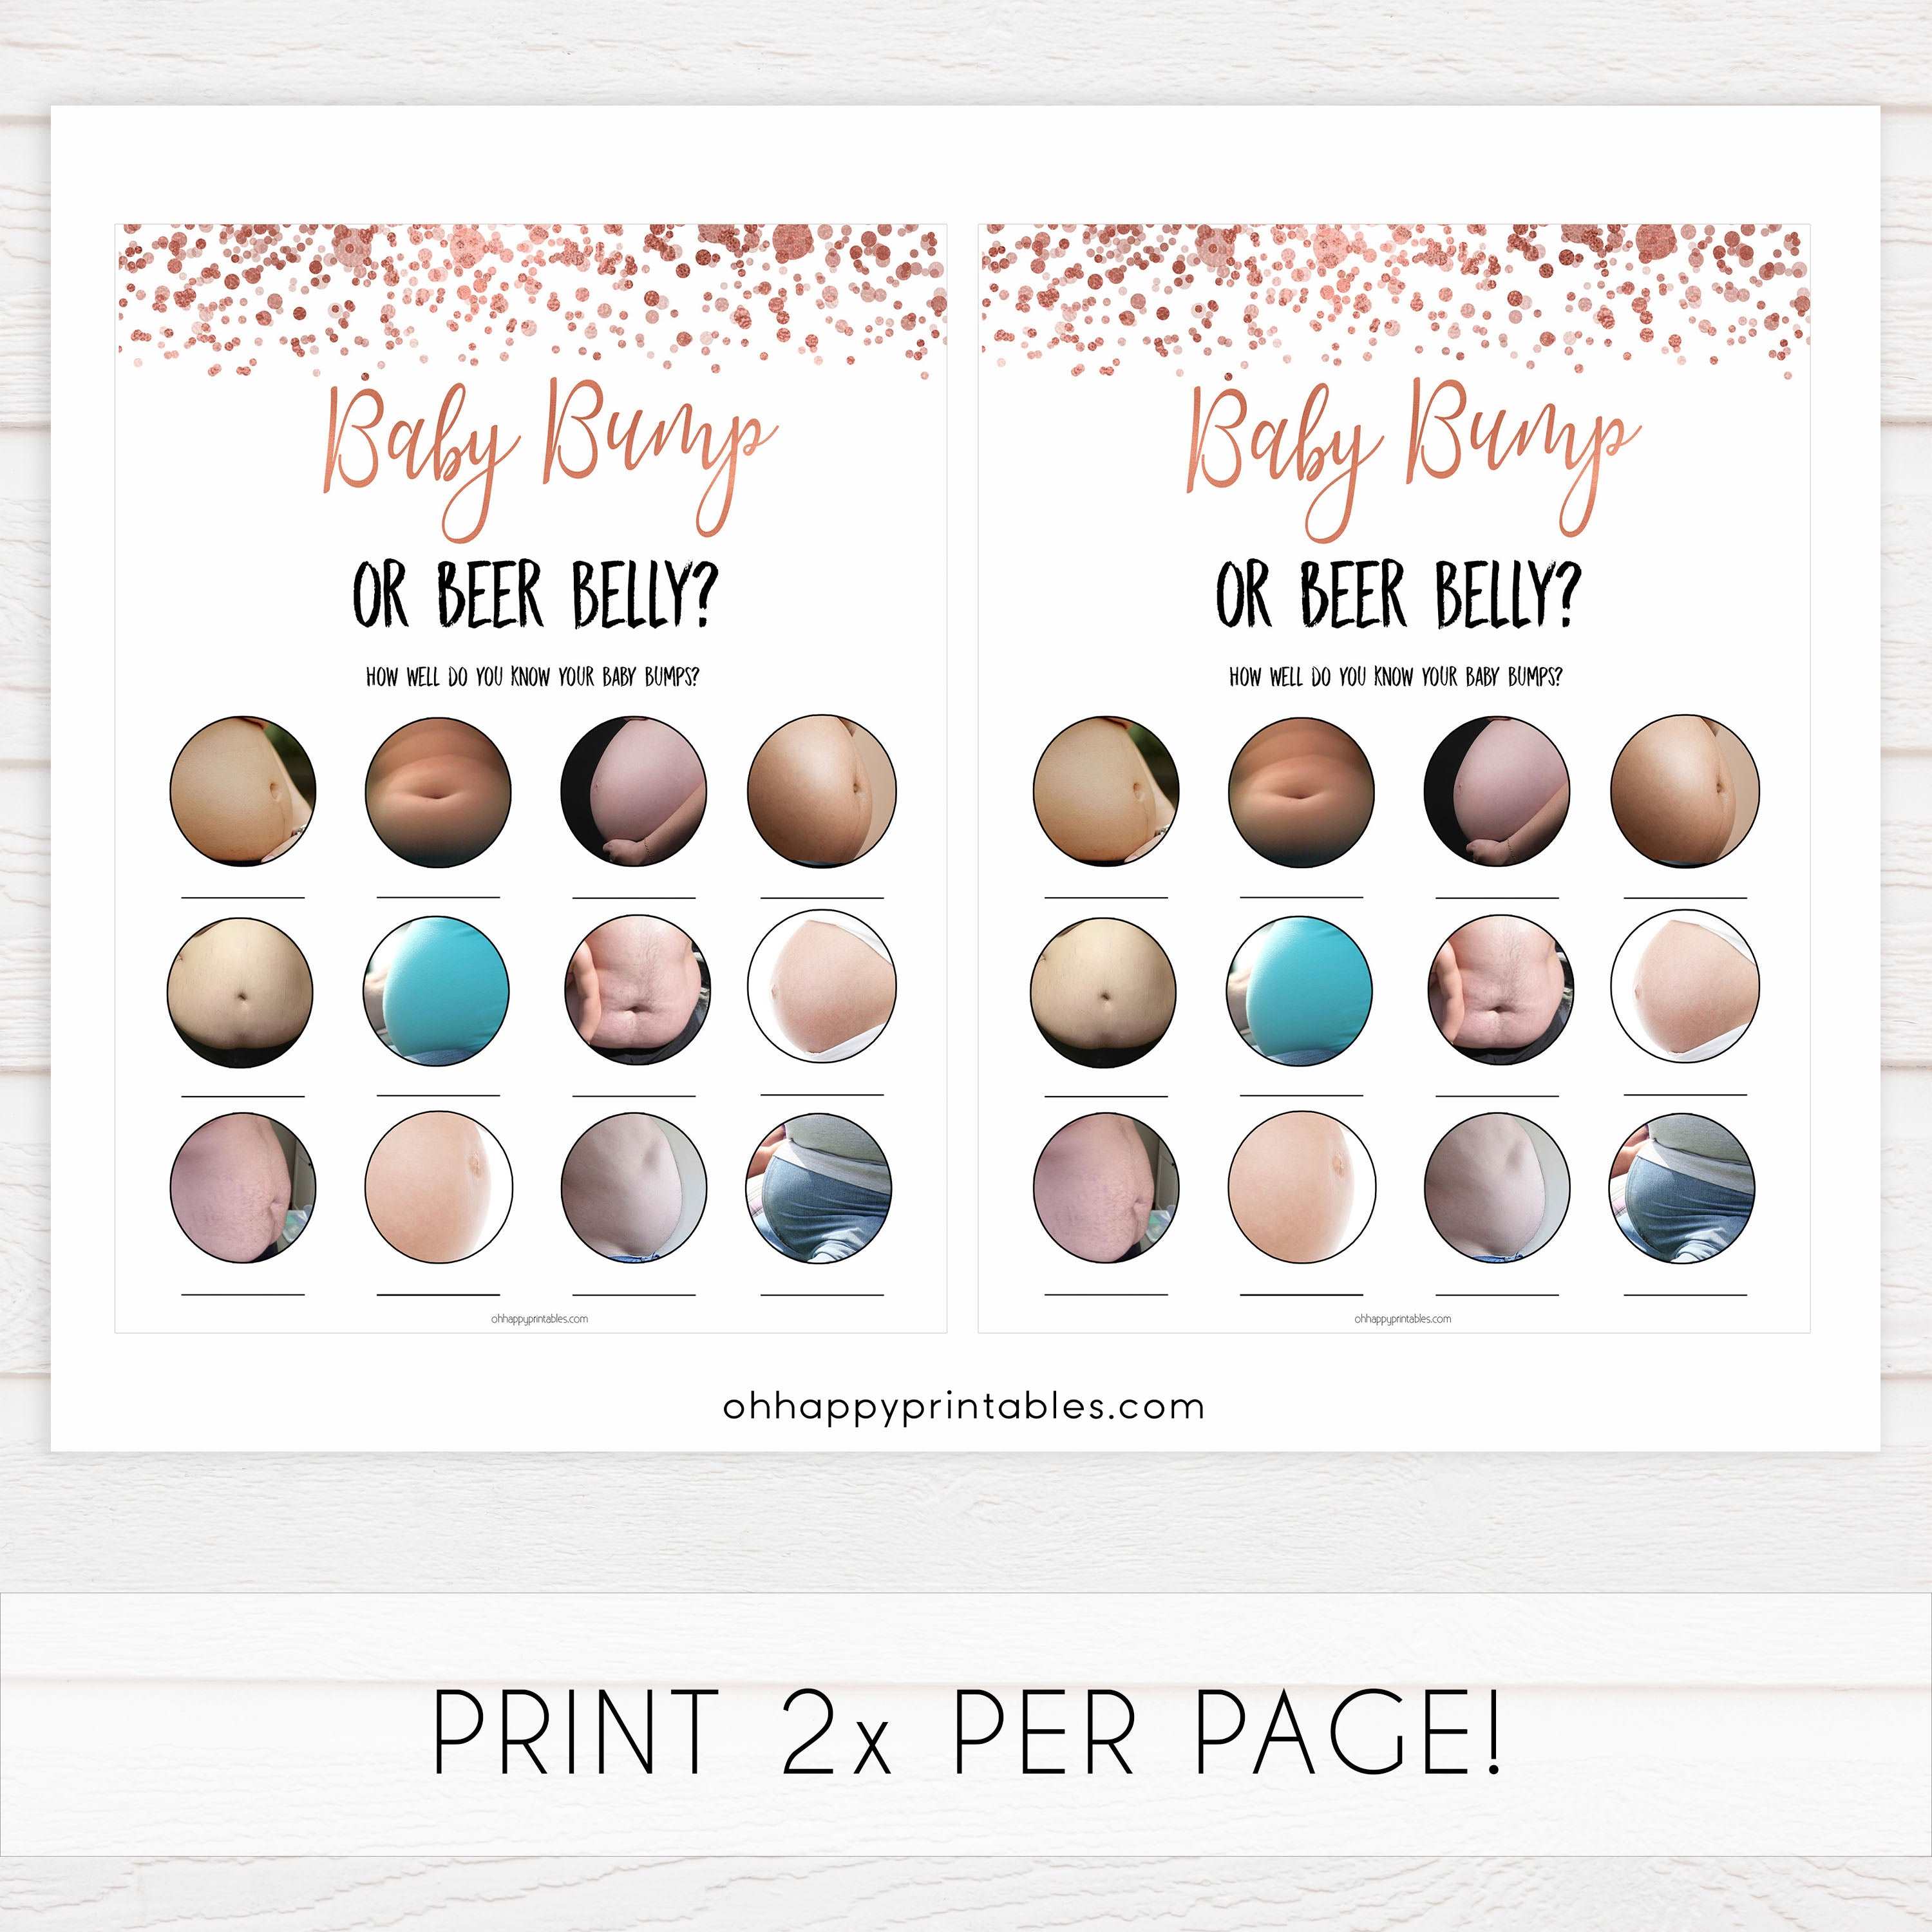 labor or porn, baby bump or beer belly game, Printable baby shower games, rose gold fun baby games, baby shower games, fun baby shower ideas, top baby shower ideas, blush baby shower, rose gold baby shower ideas